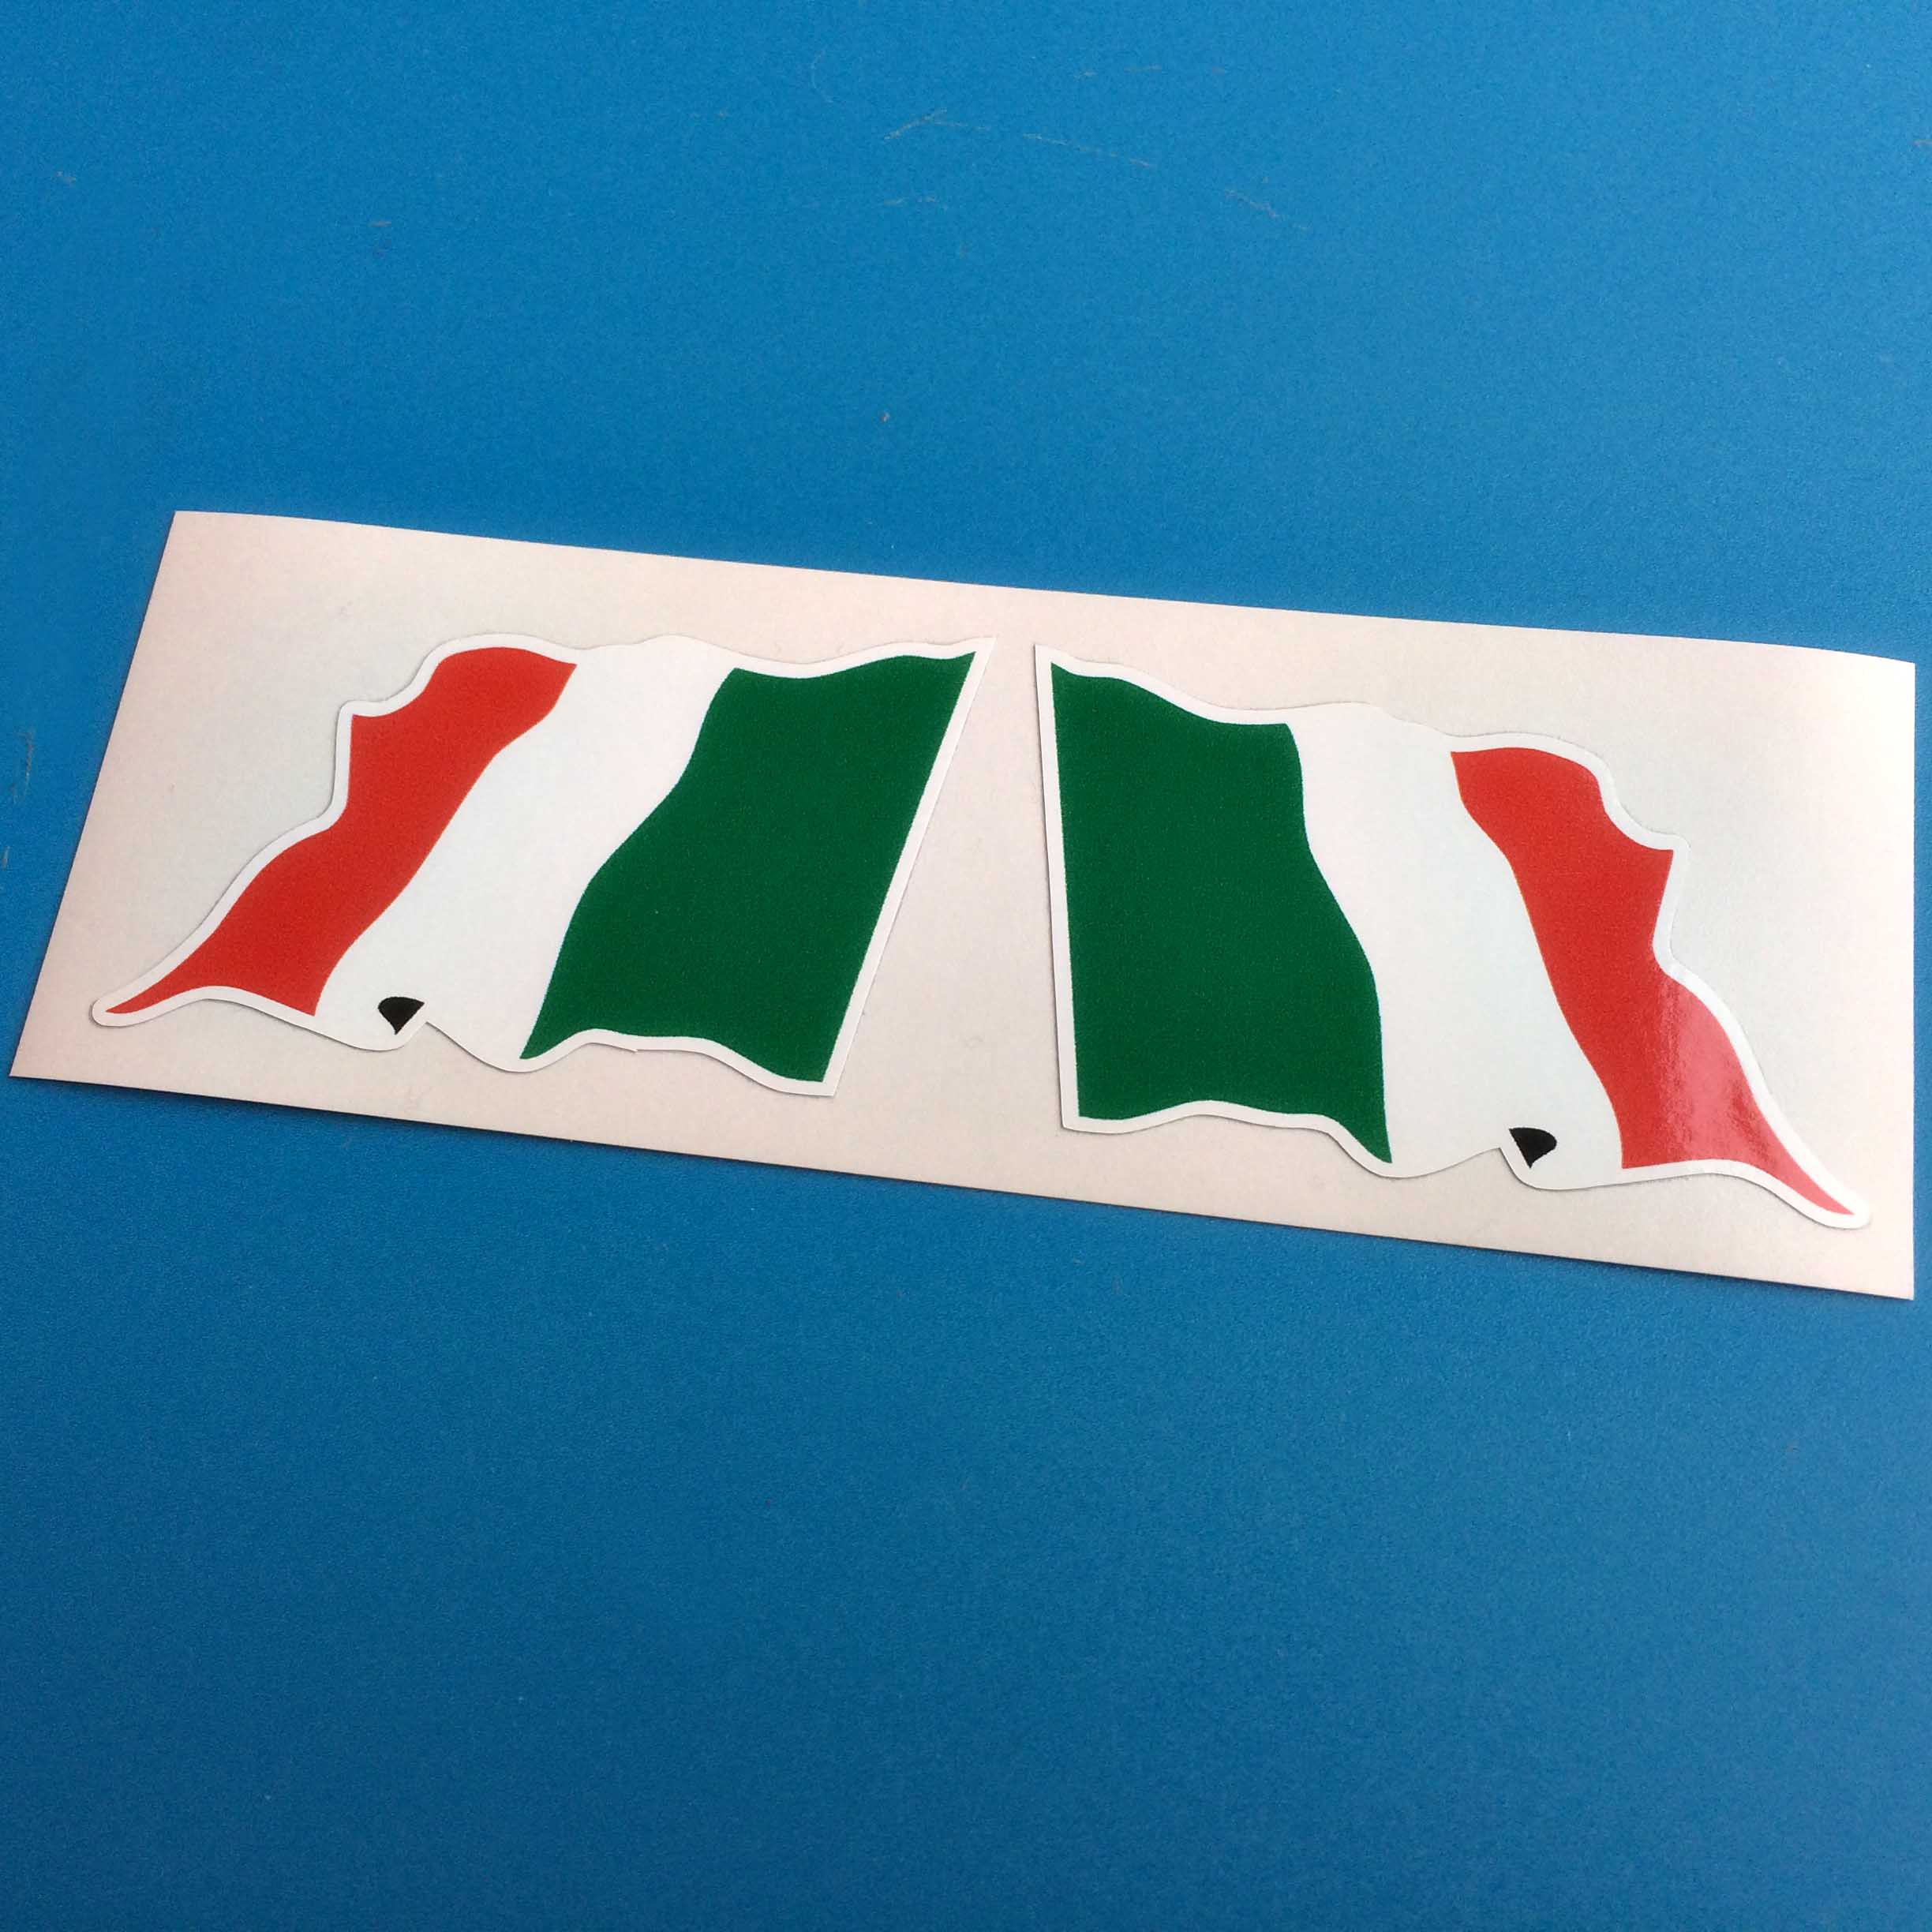 ITALY ITALIAN WAVY FLAG STICKERS. A wavy Italian flag. Three vertical columns of green, white and red.